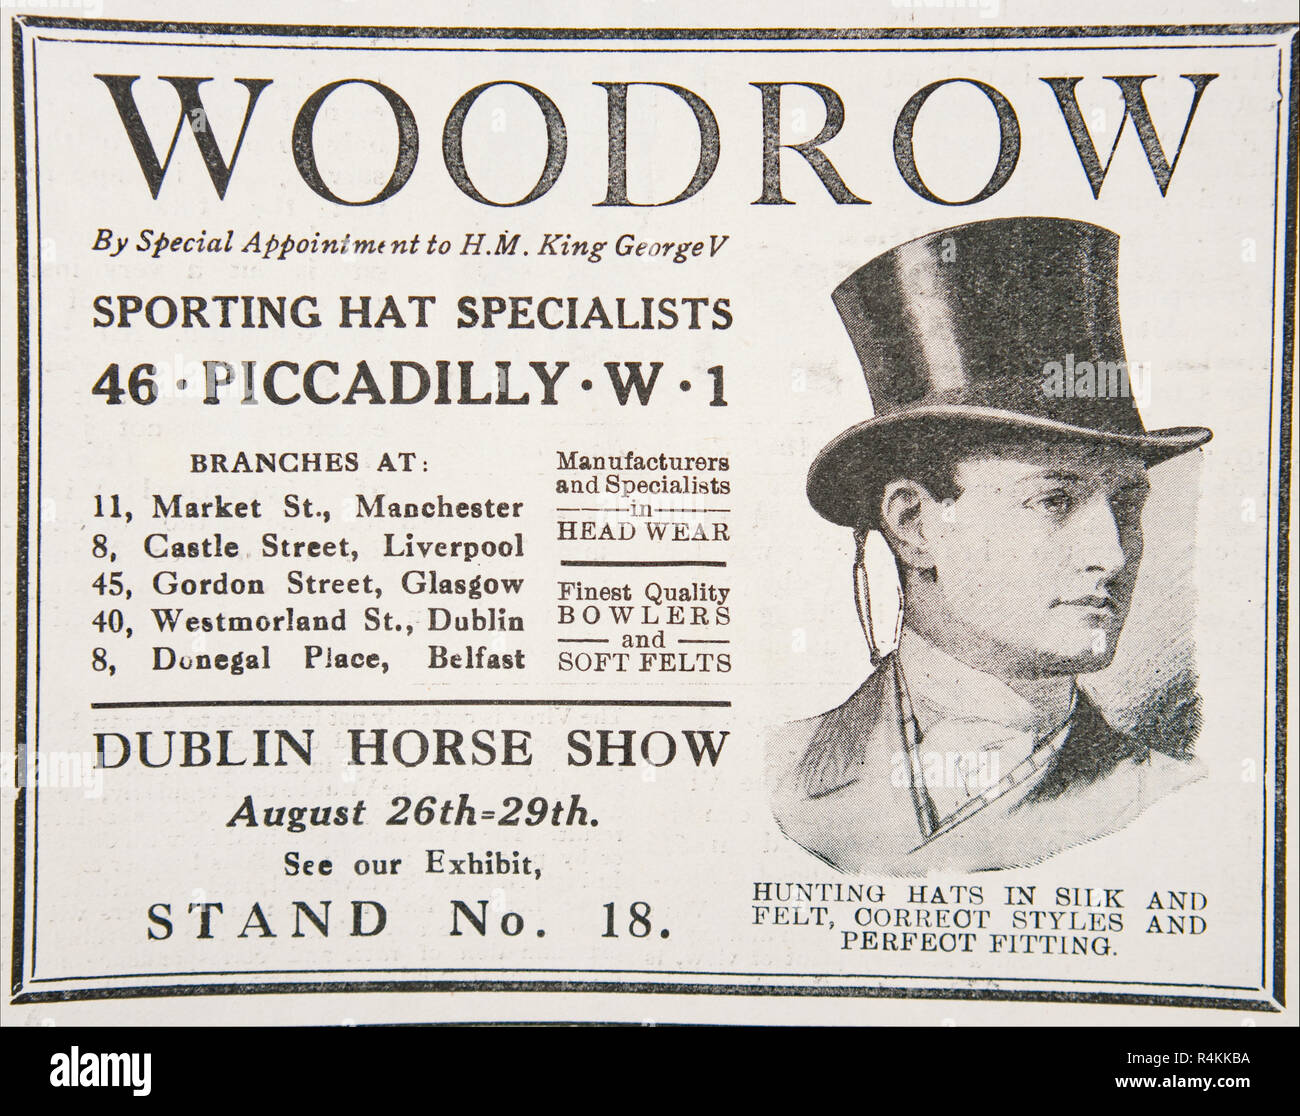 An old advert for Woodrow Sporting Hat Specialists. From an old British magazine from the 1914-1919 period. Stock Photo